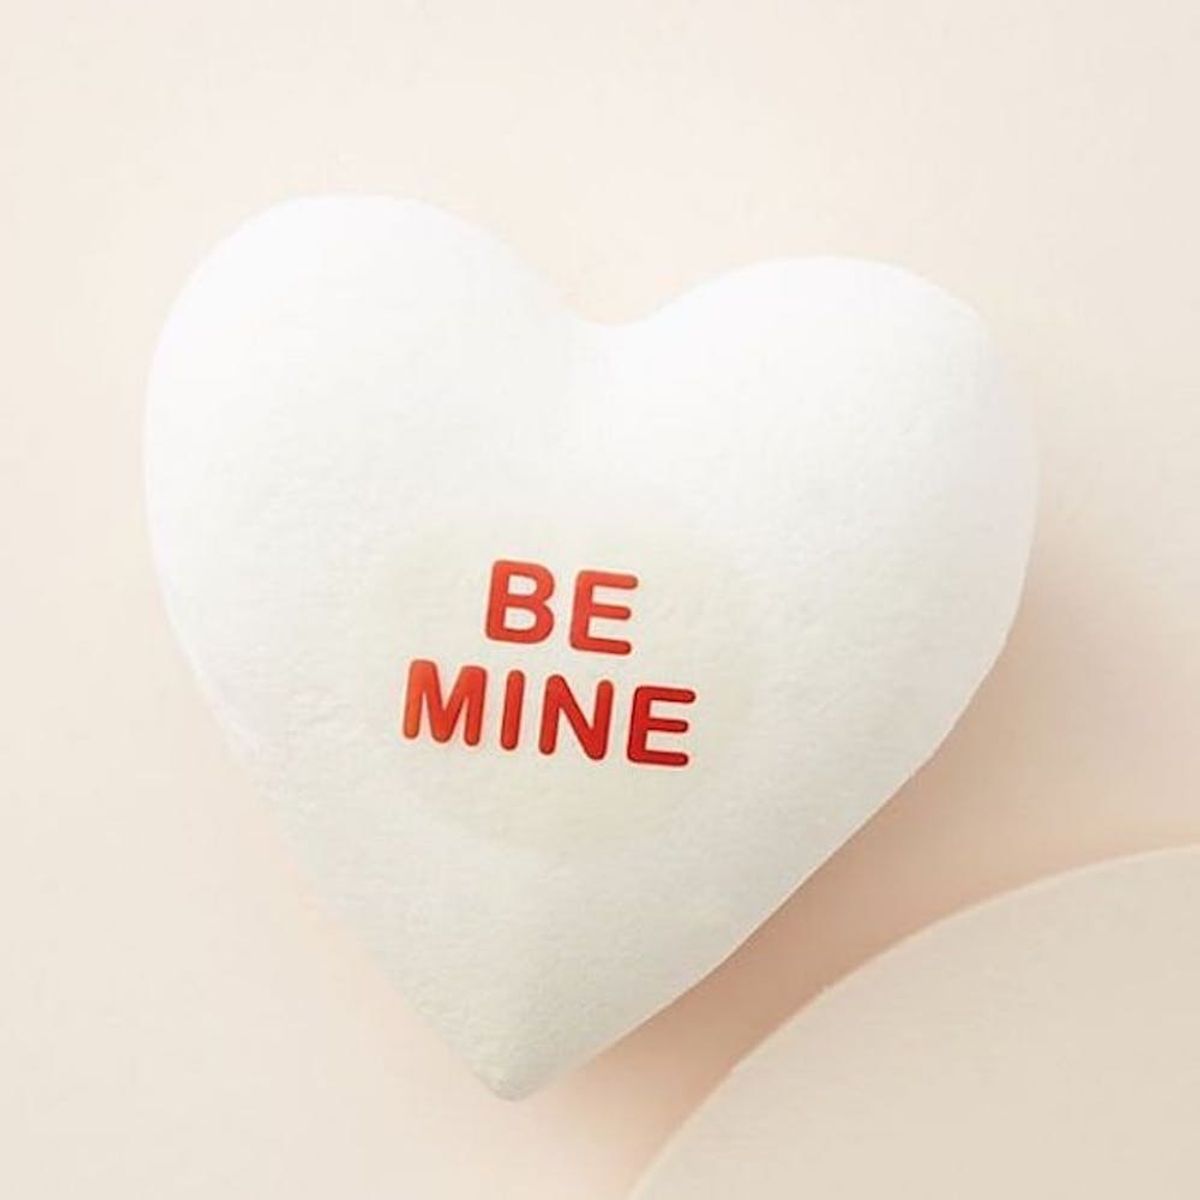 12 Expensive-Looking Valentine’s Day Gifts for $25 and Under